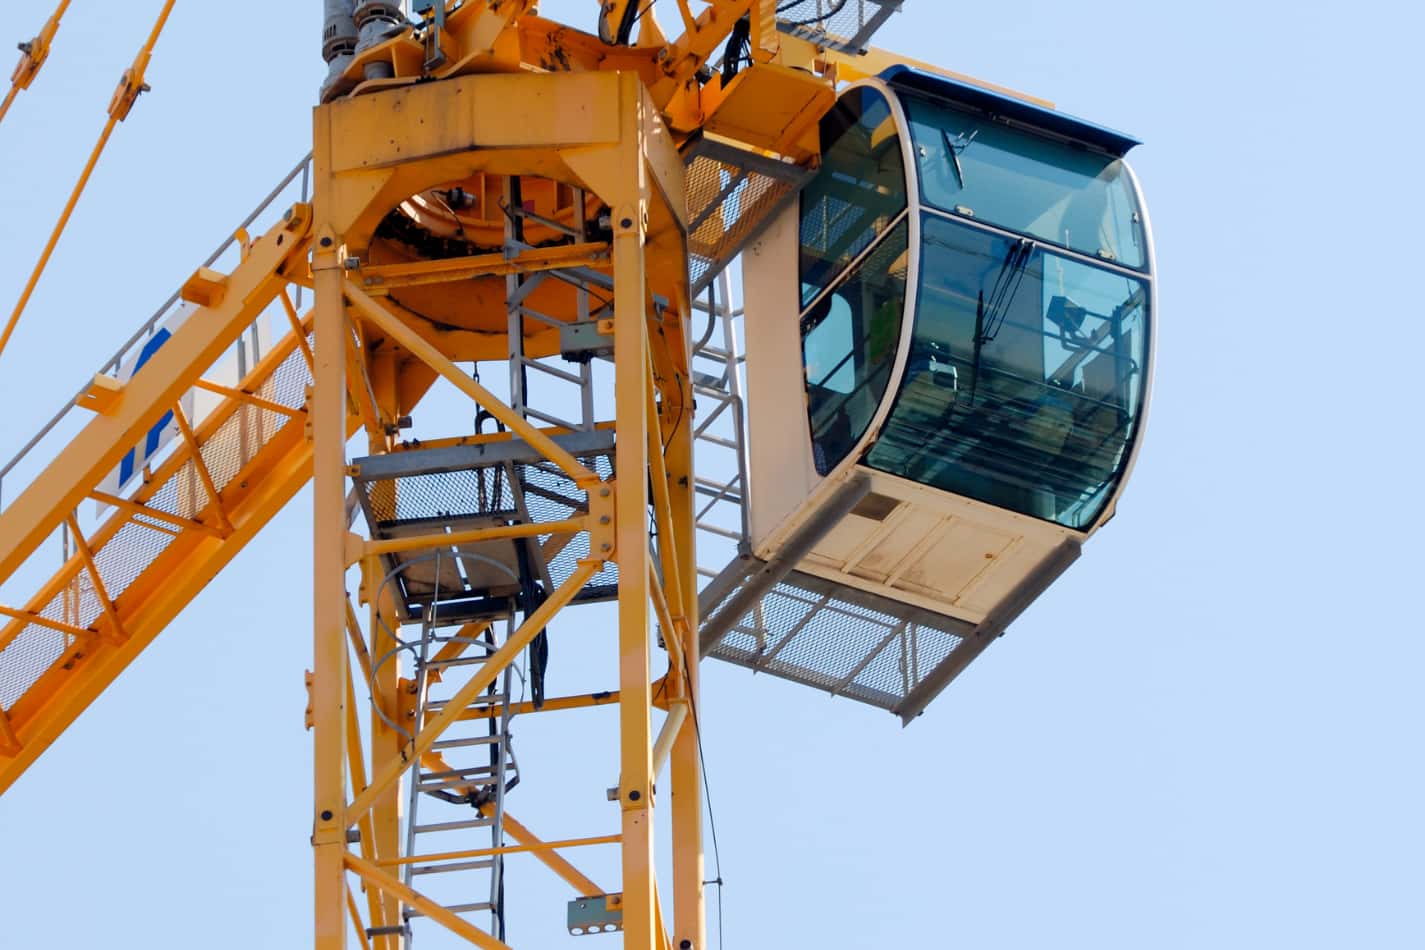 How Much Does it Cost to Become a Crane Operator?